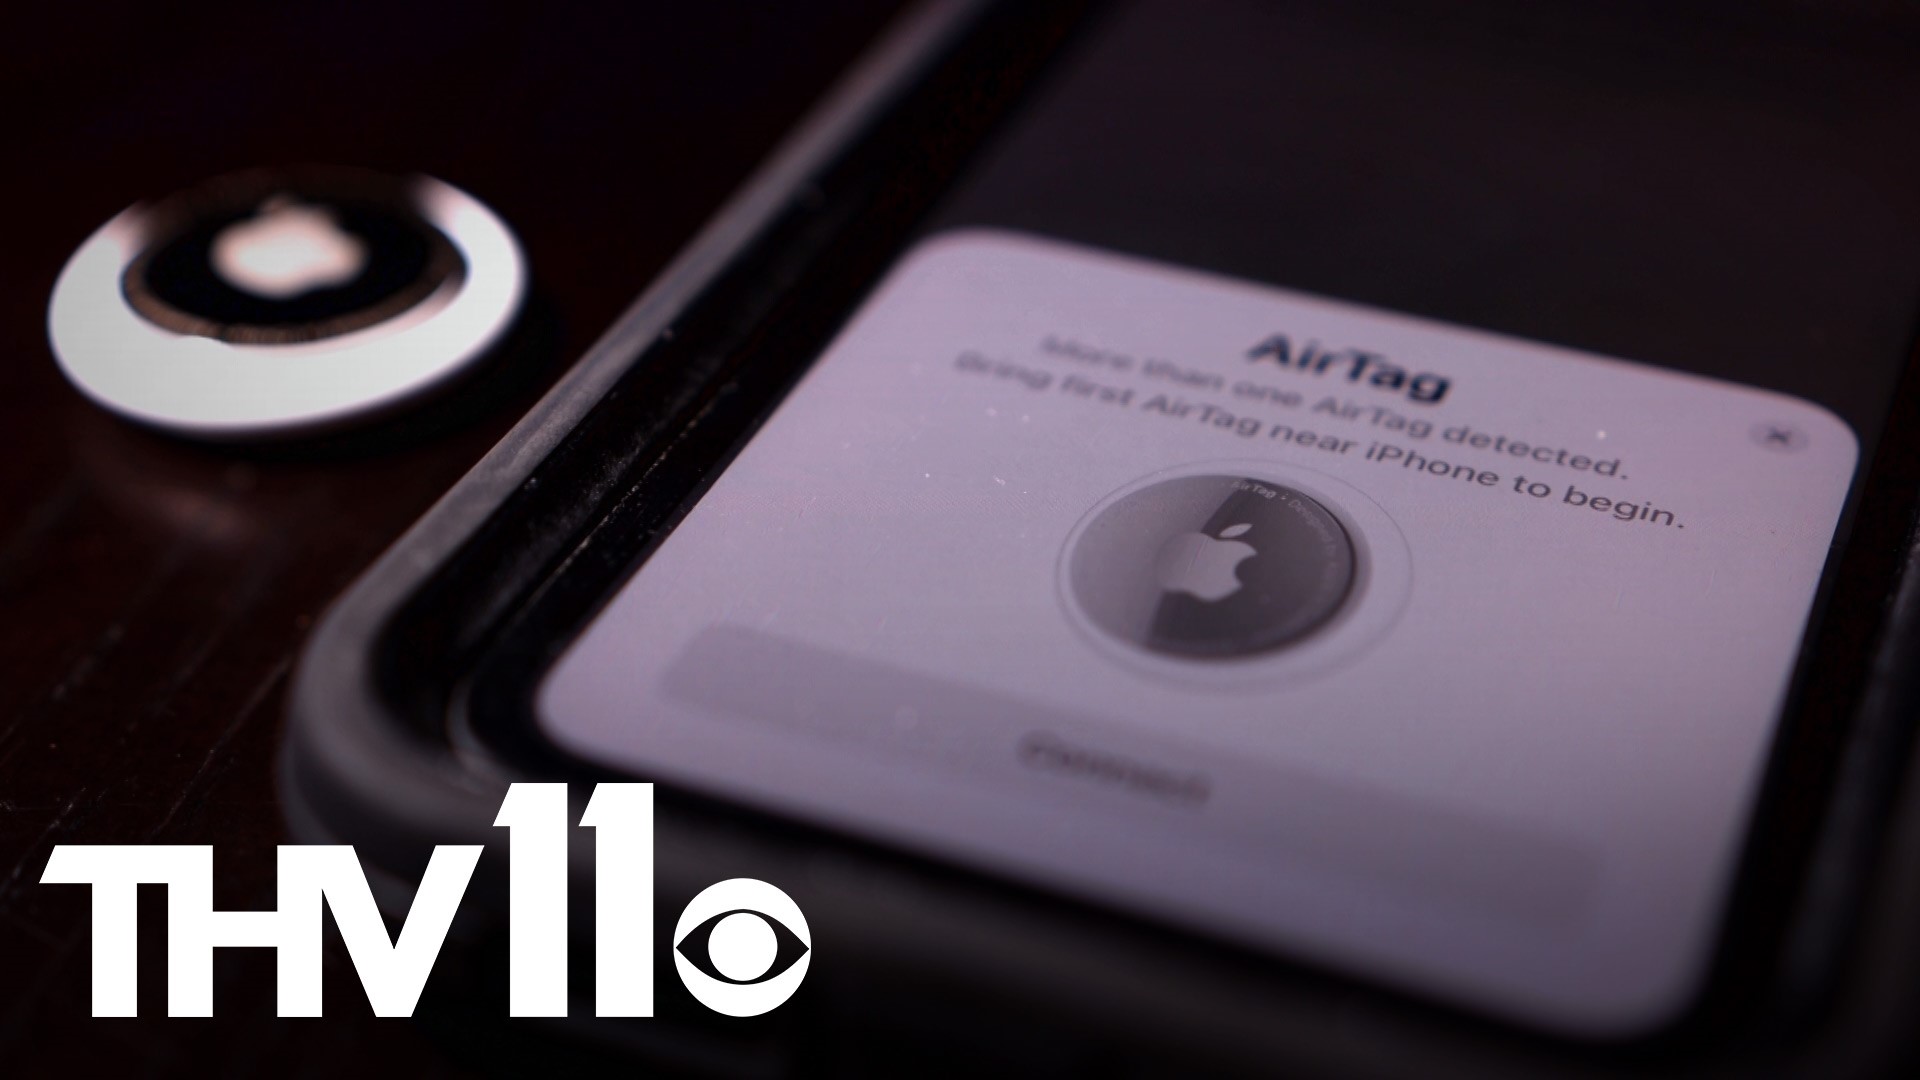 Apple AirTags are being used to track people. Here's what is being